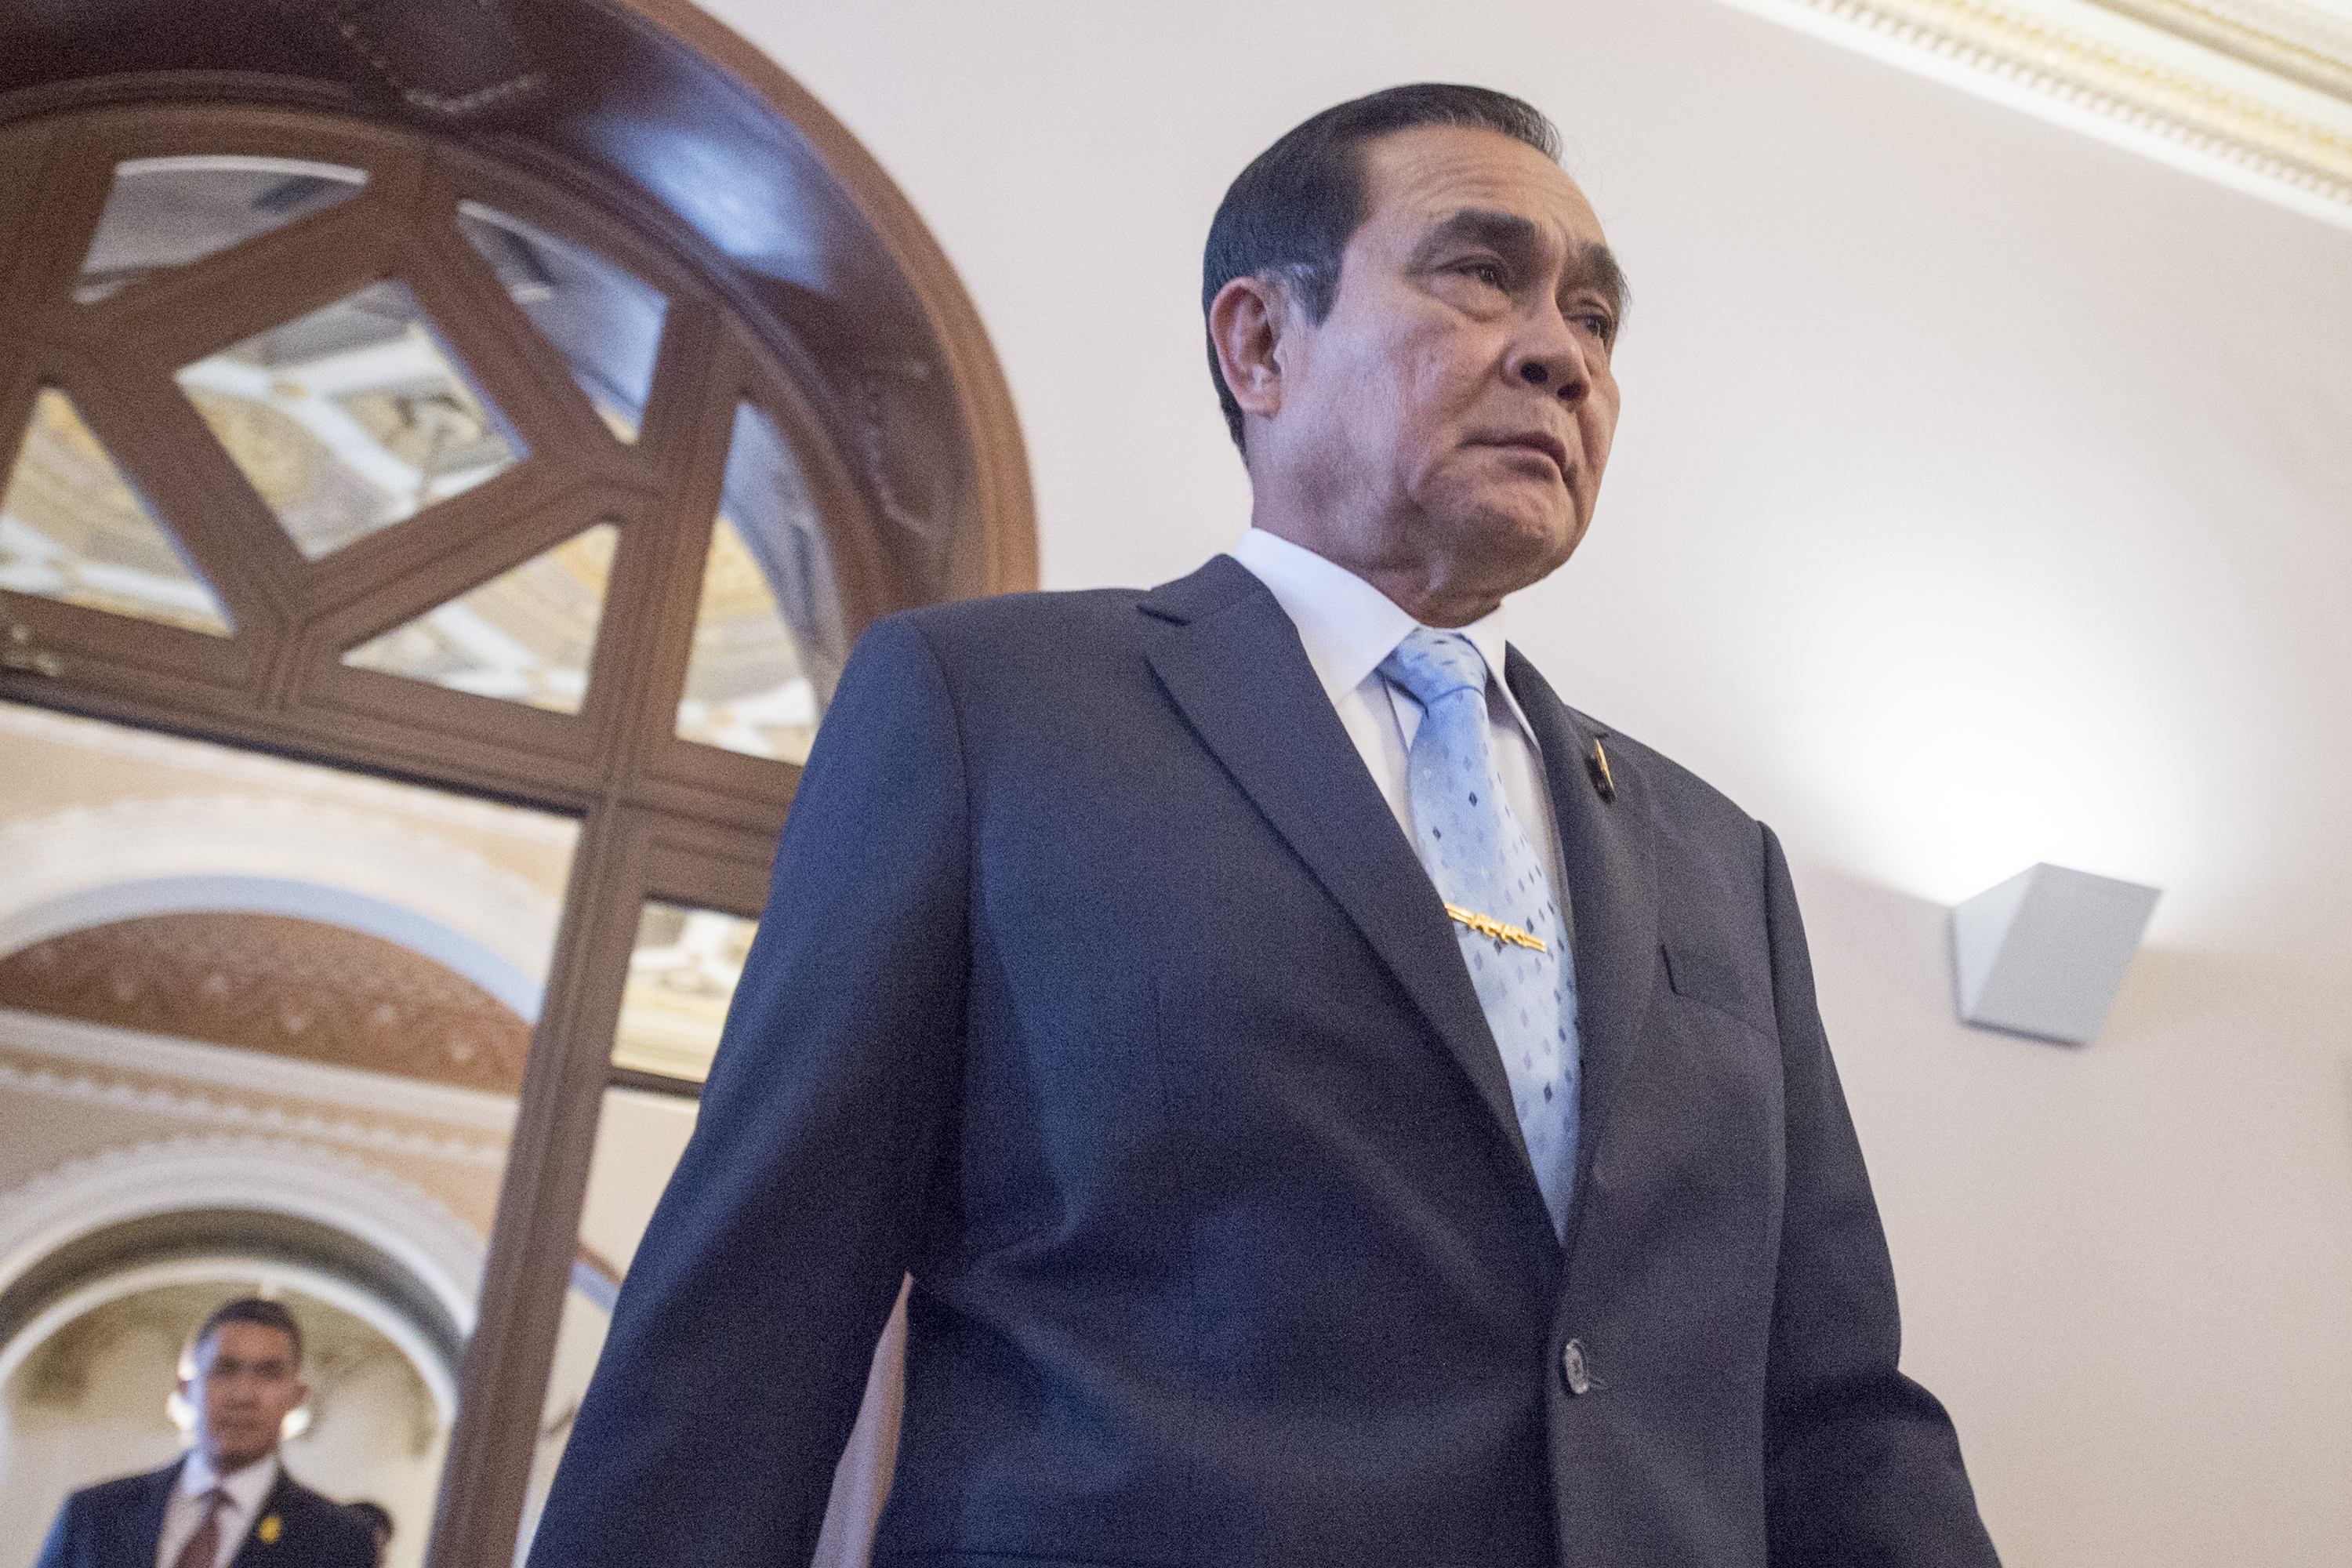 Thai Prime Minister Prayut Chan-ocha (photo credit: Chairman of the Joint Chiefs of Staff/flickr)